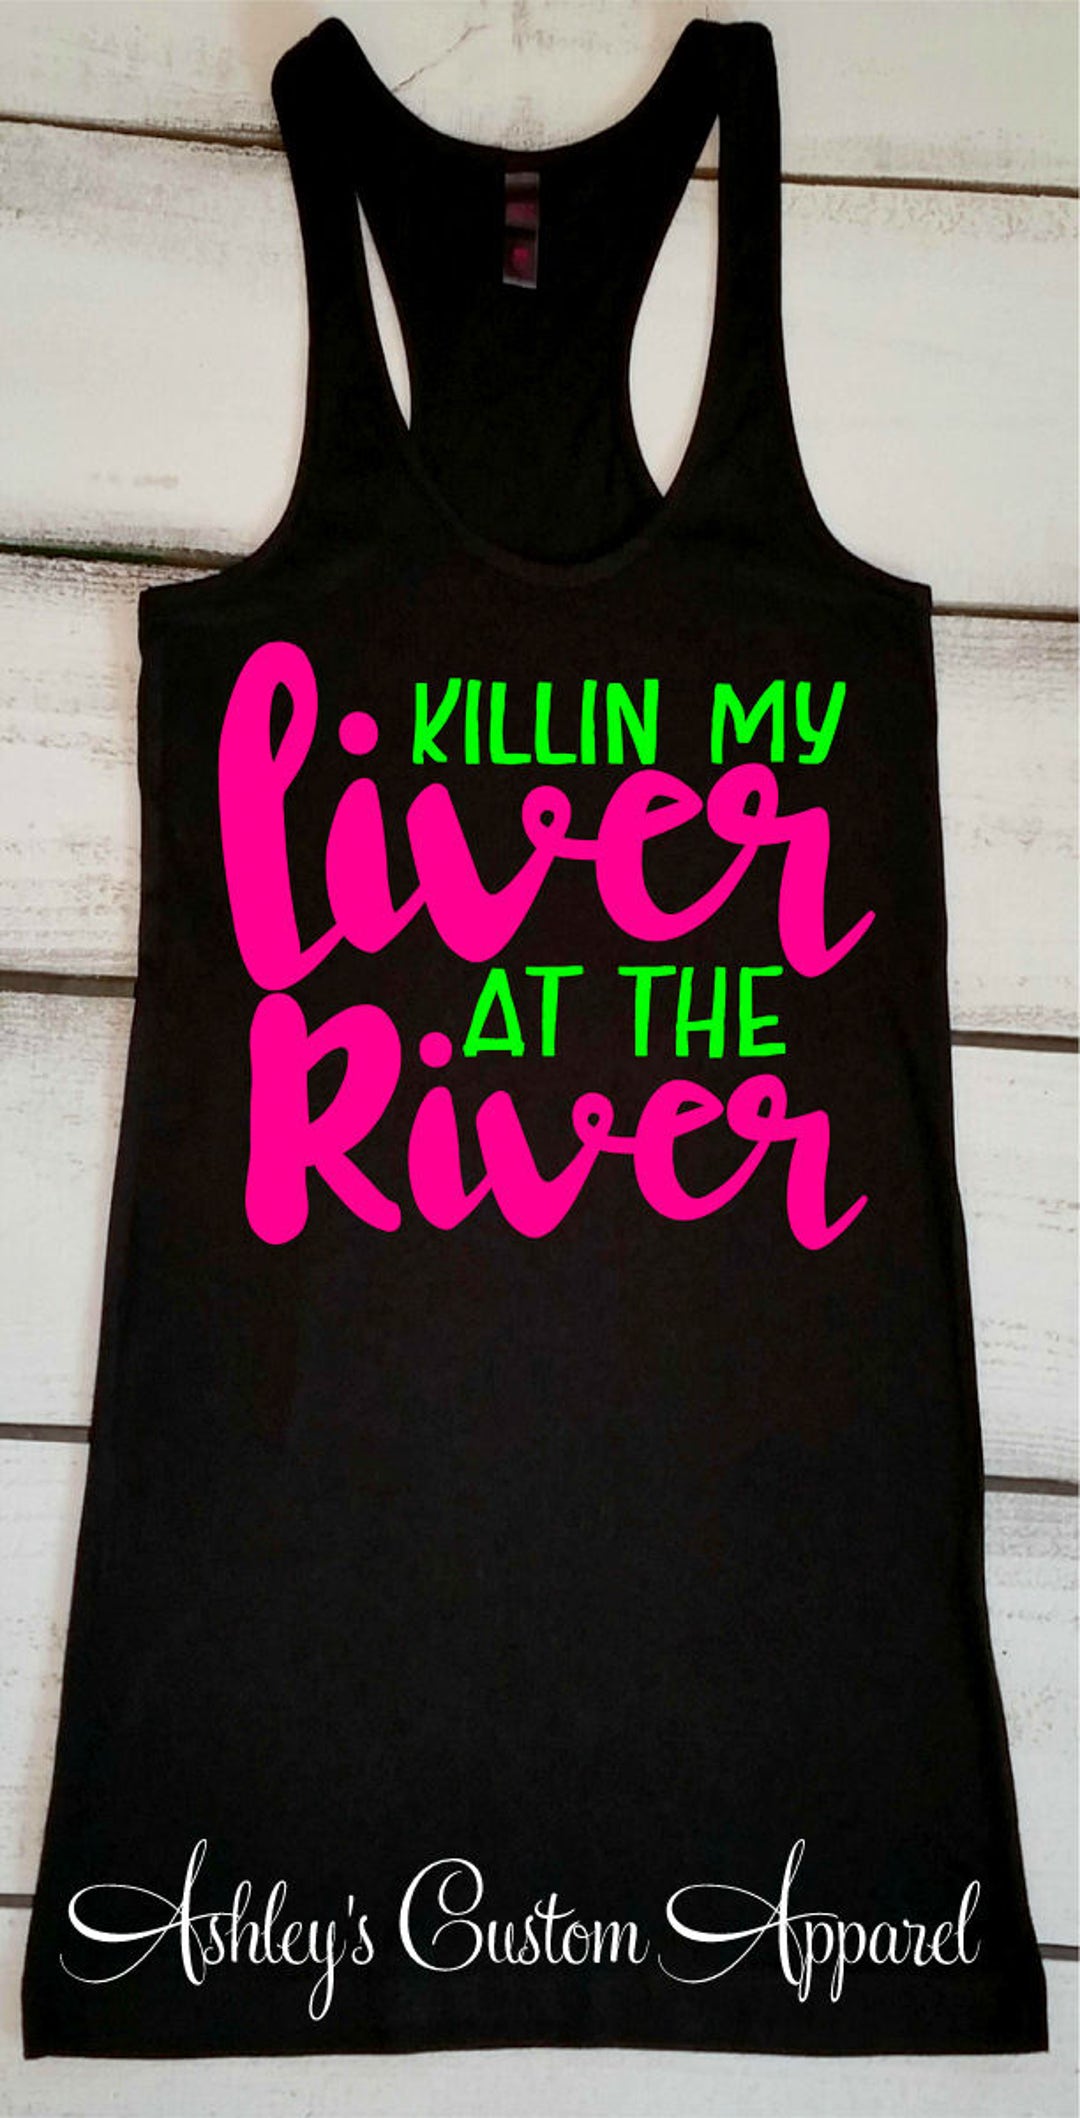 Killin' My Liver at the River Floating the River Tank - Etsy